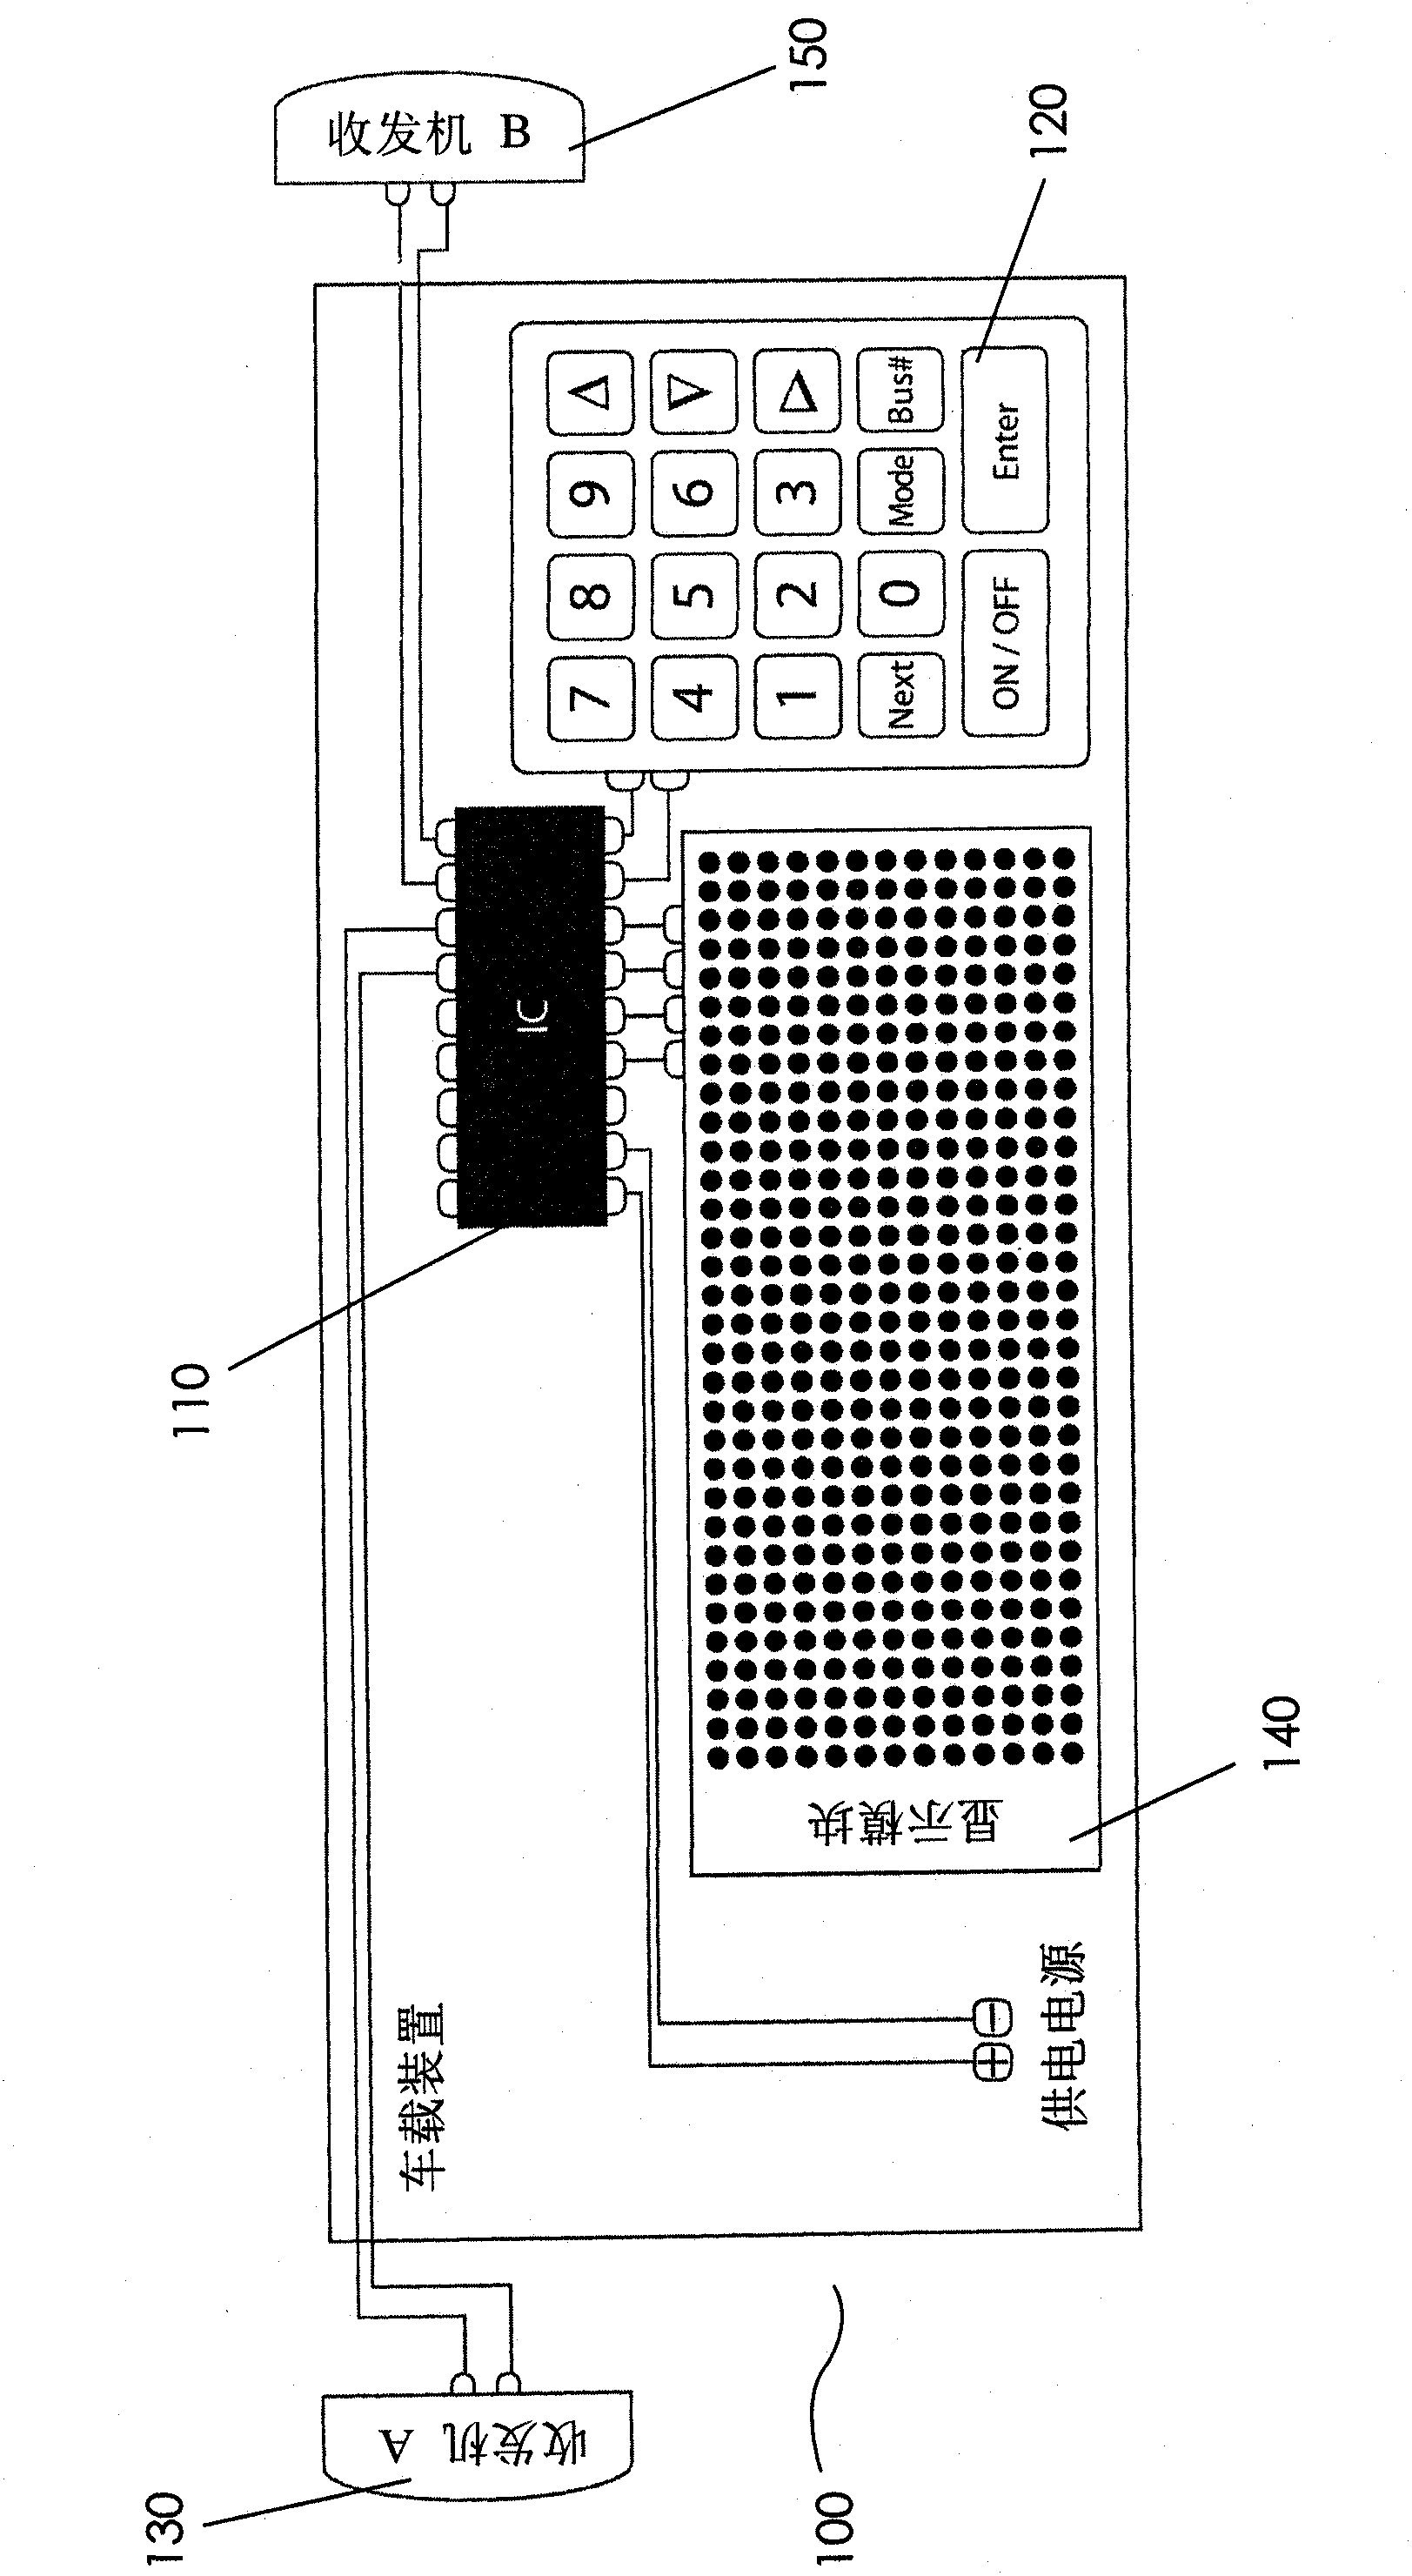 System and method for informing public transport vehicle arrival information